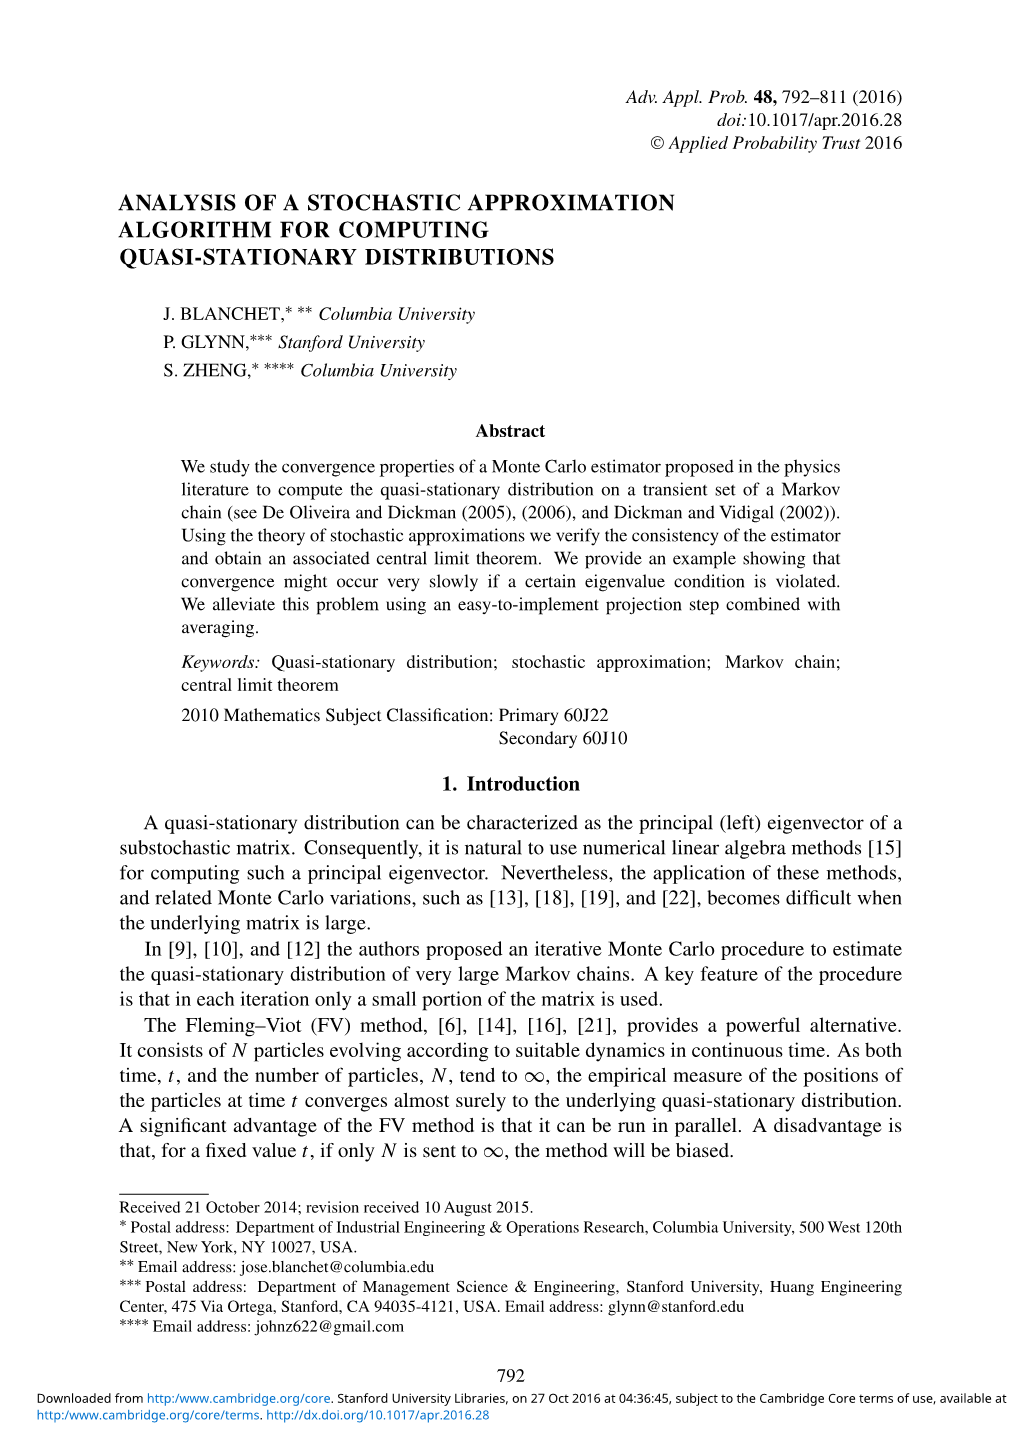 Analysis of a Stochastic Approximation Algorithm for Computing Quasi-Stationary Distributions